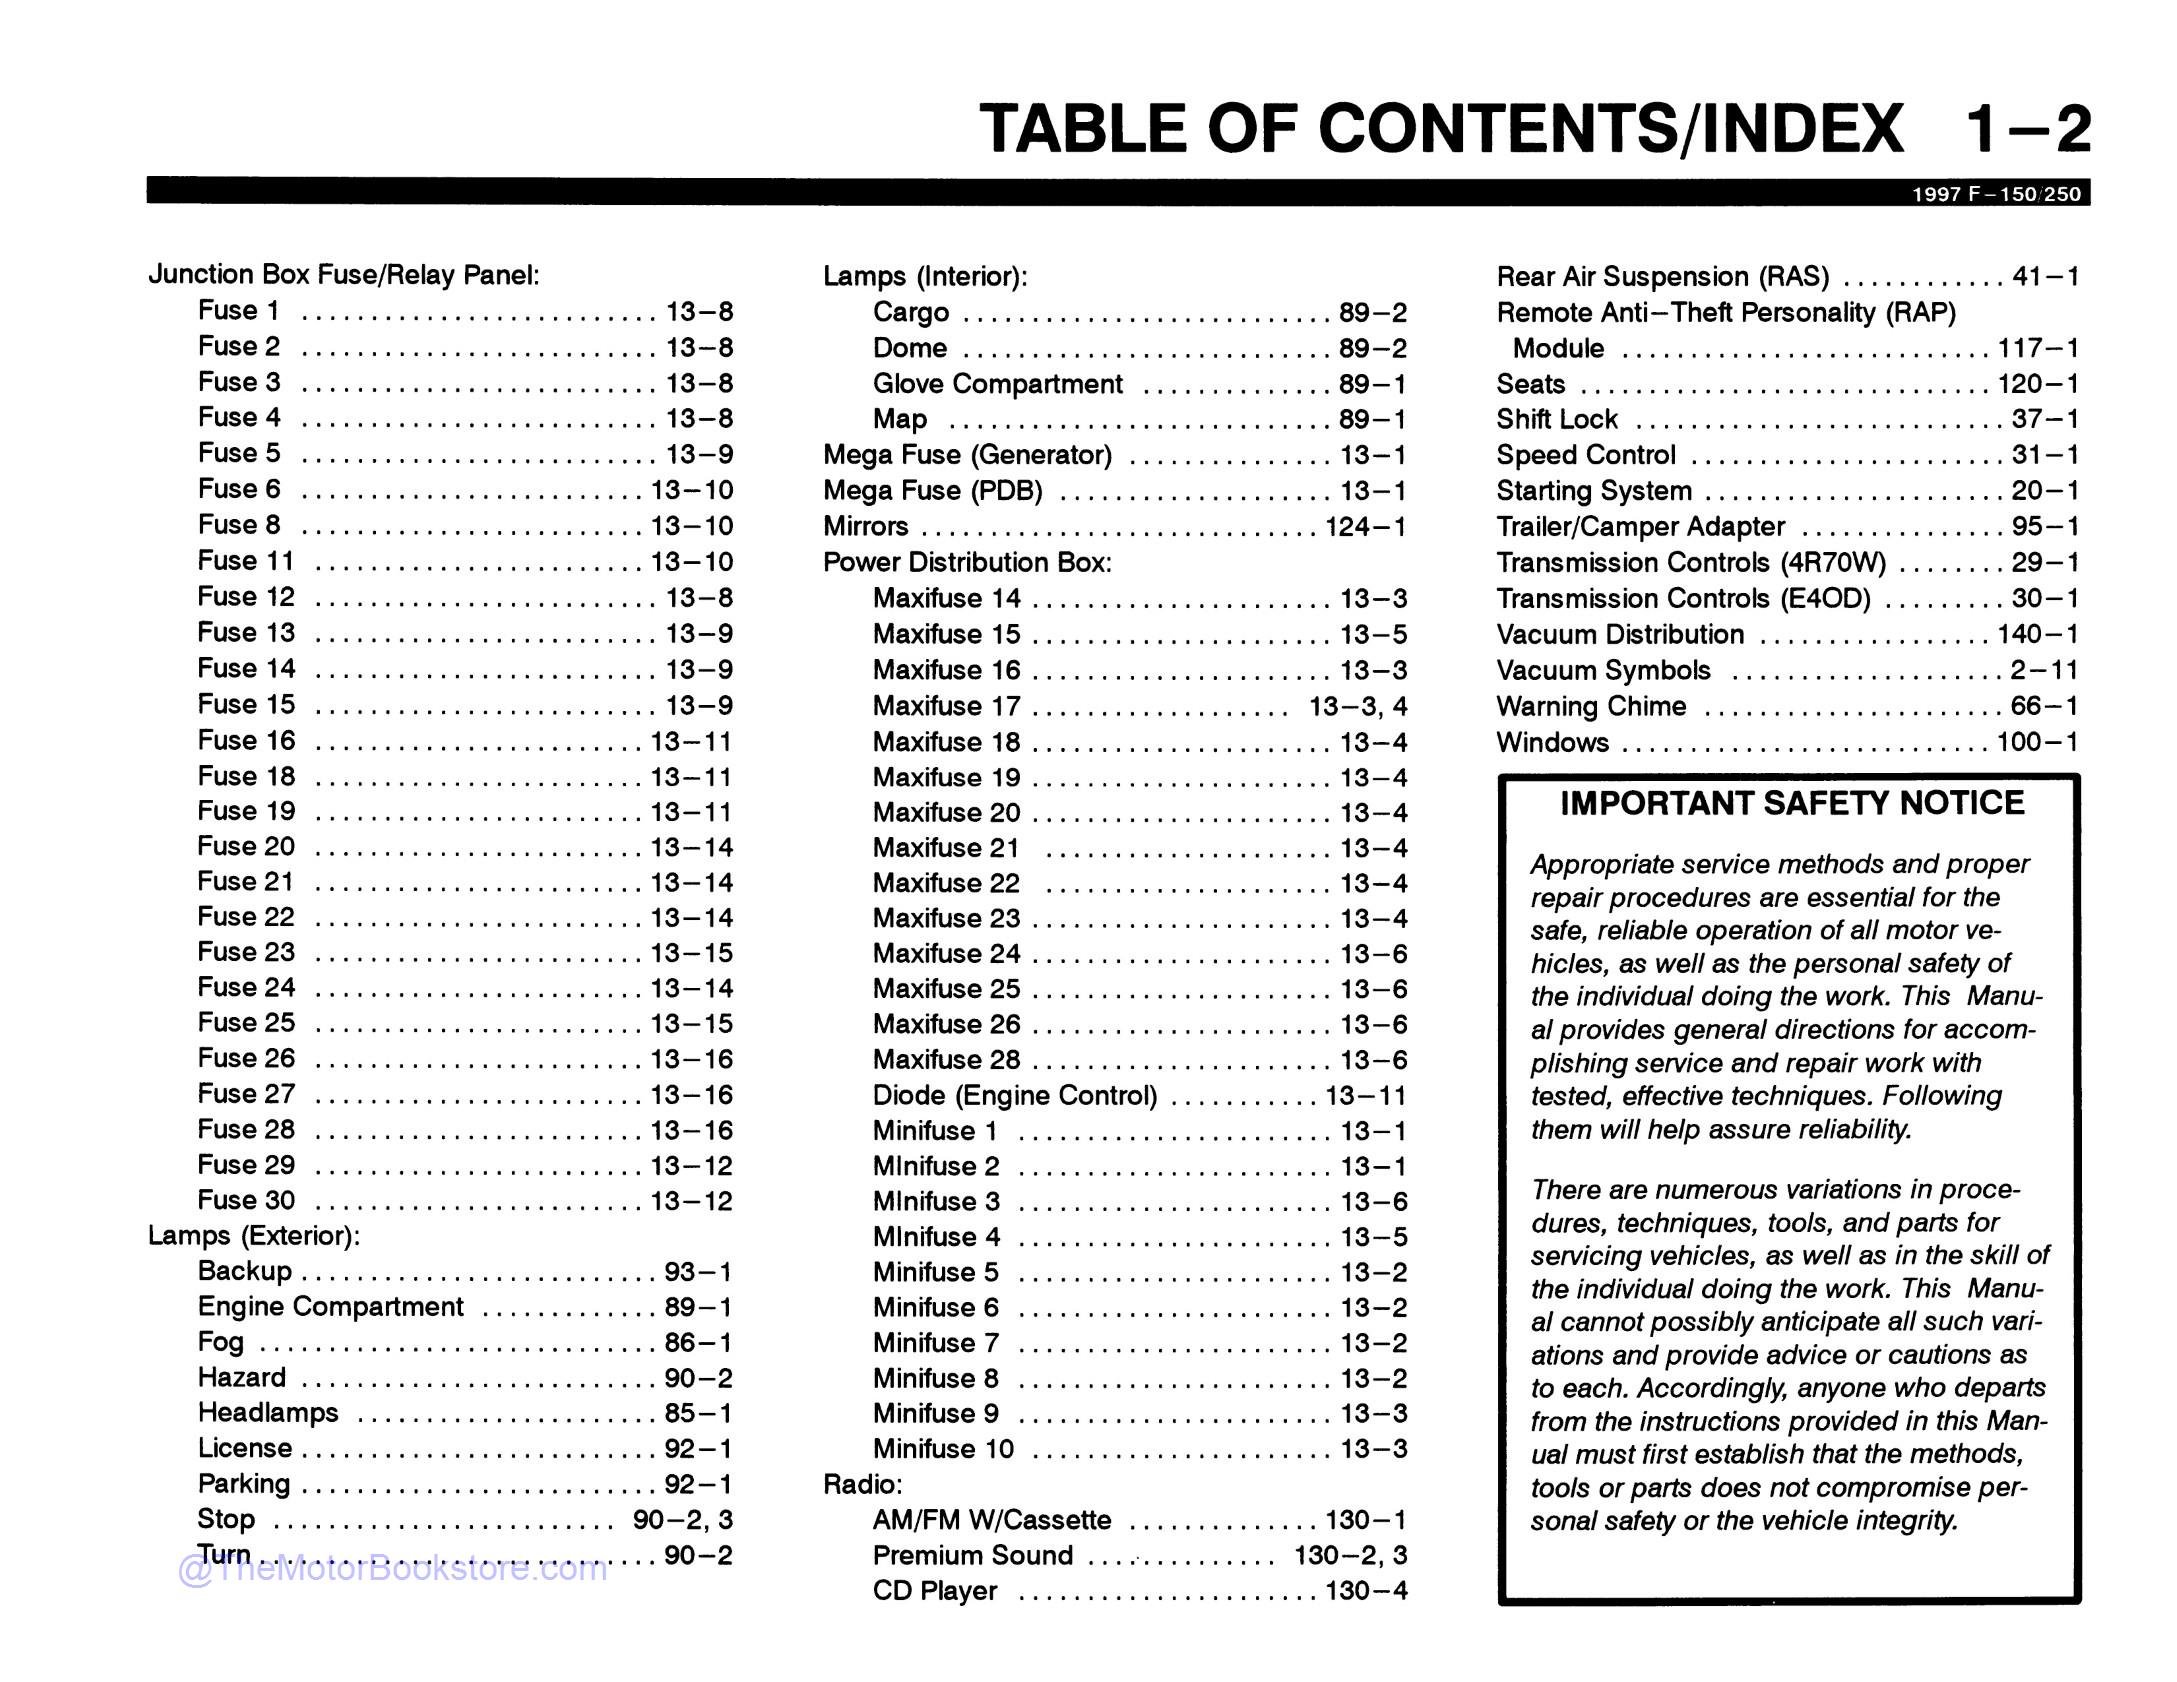 1997 Ford F-150, F-250 Electrical Troubleshooting Manual  - Table of Contents 2